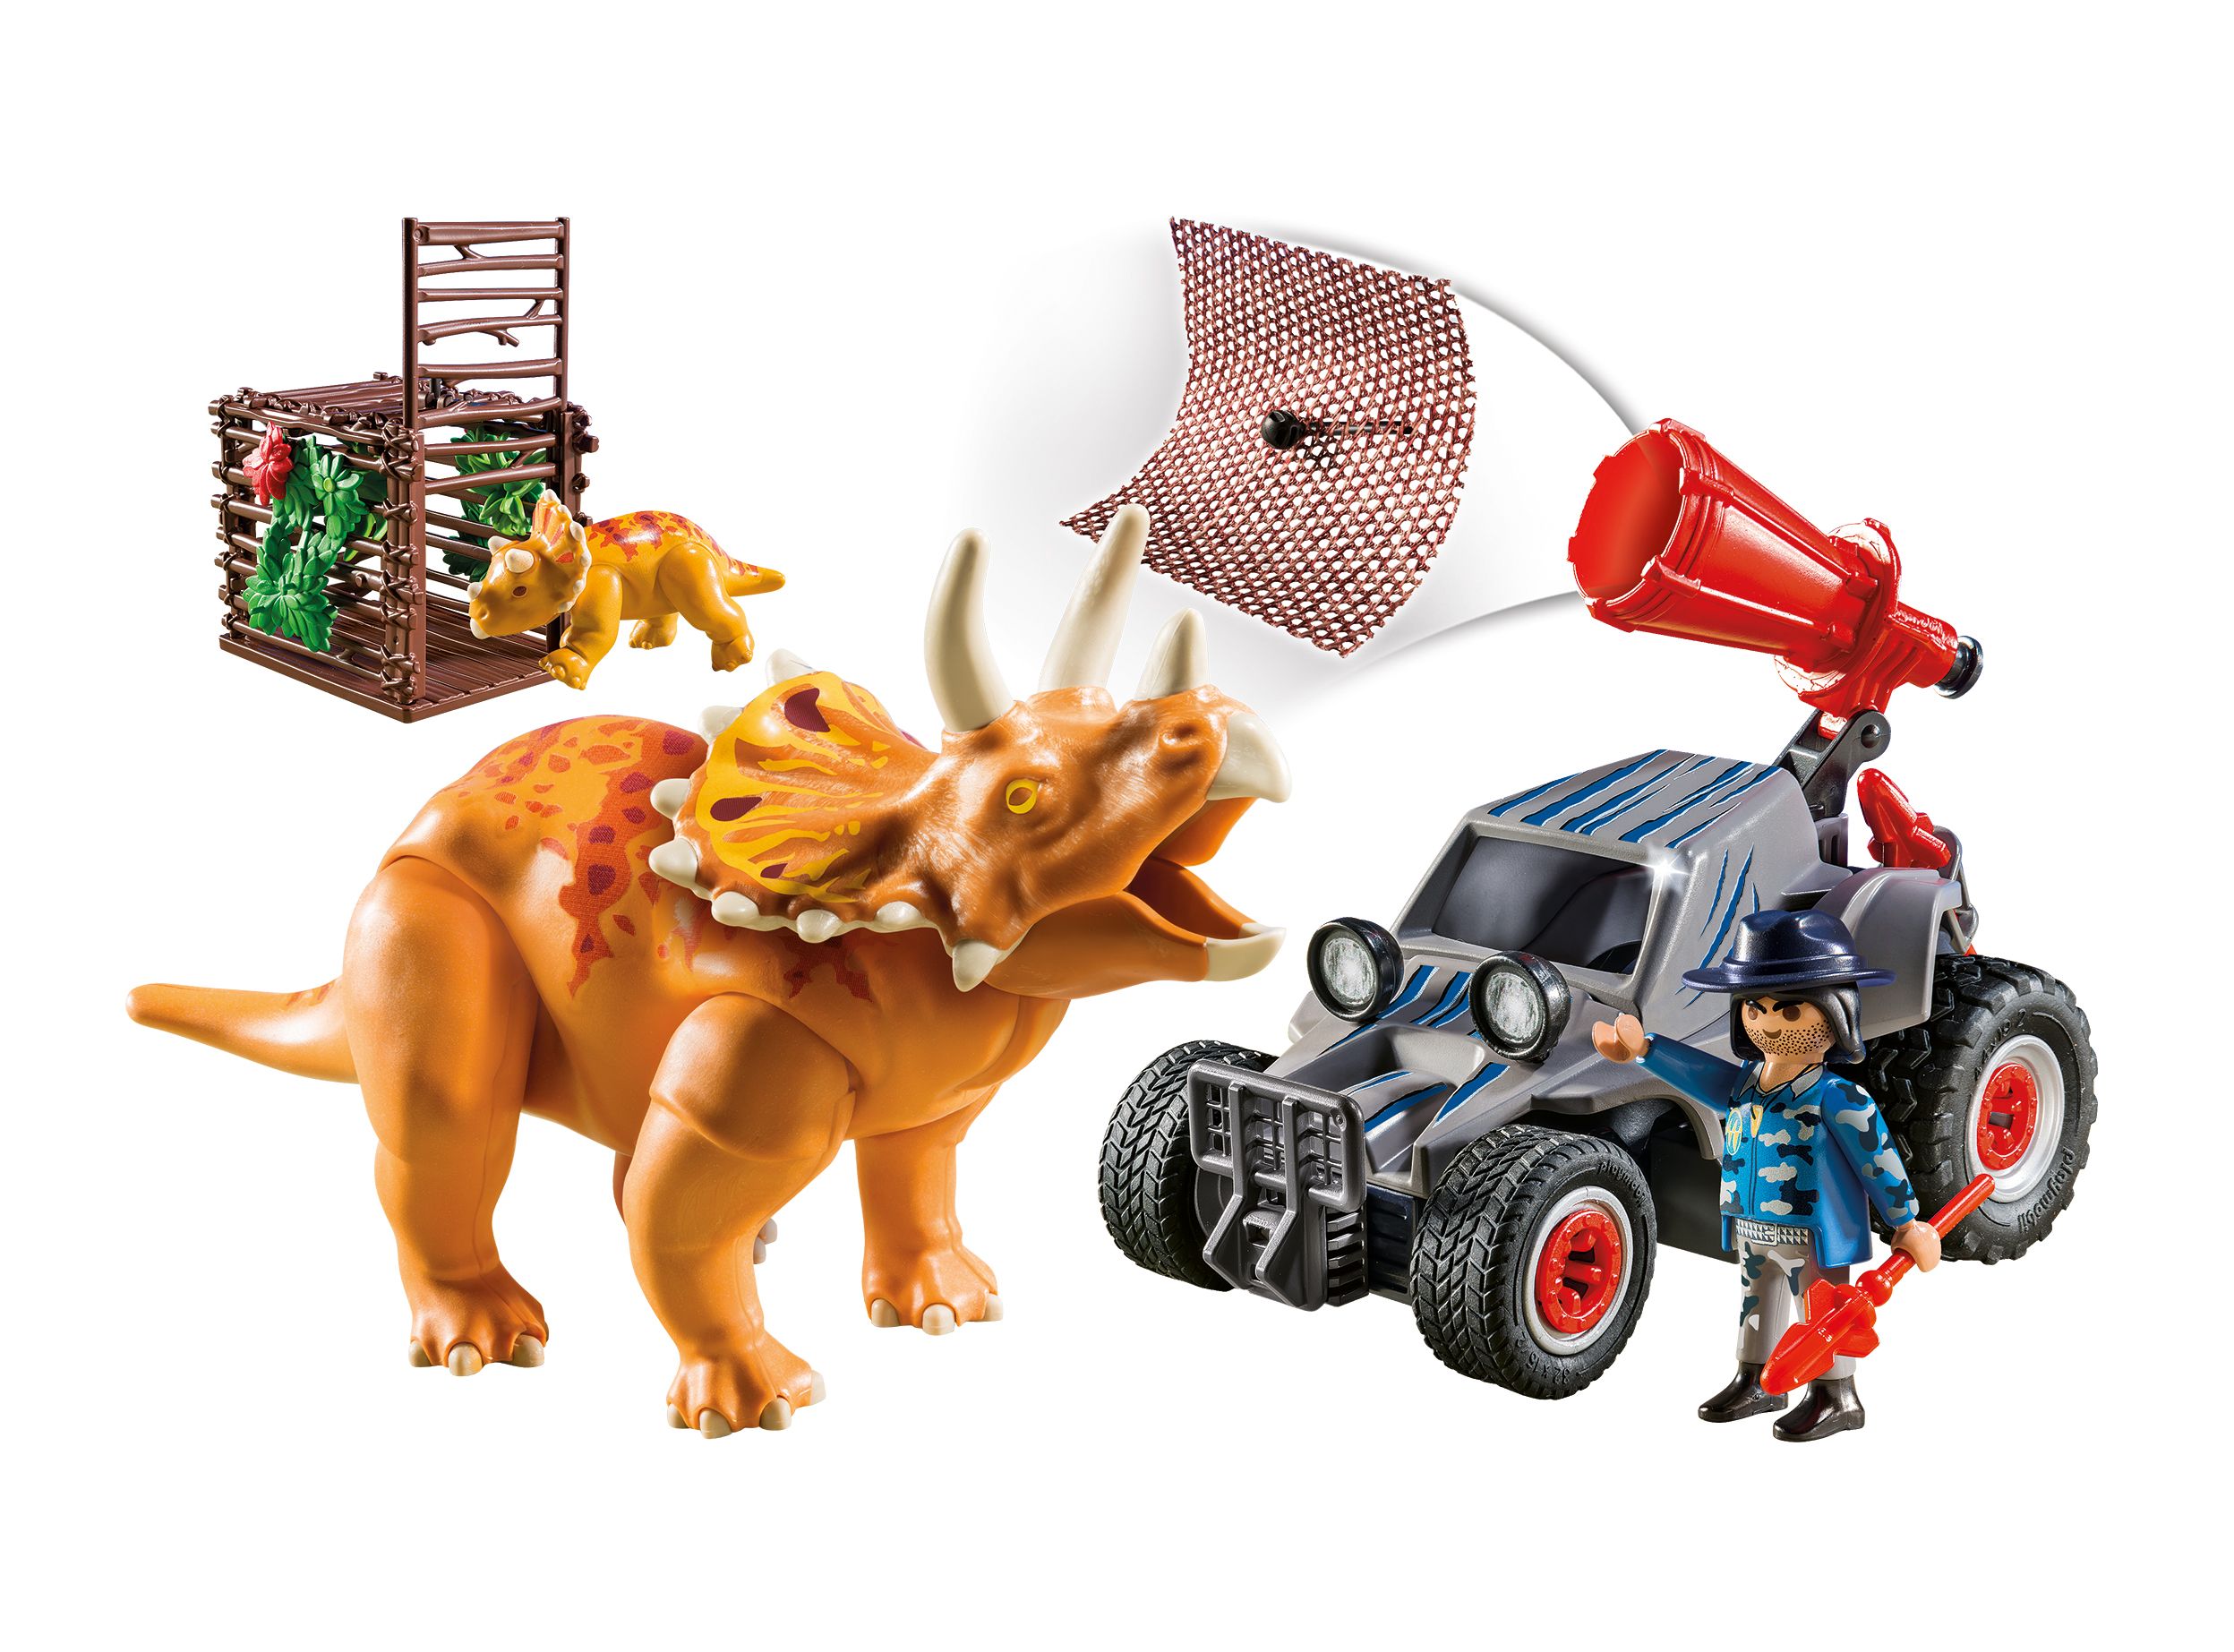 PLAYMOBIL Enemy Quad with Triceratops